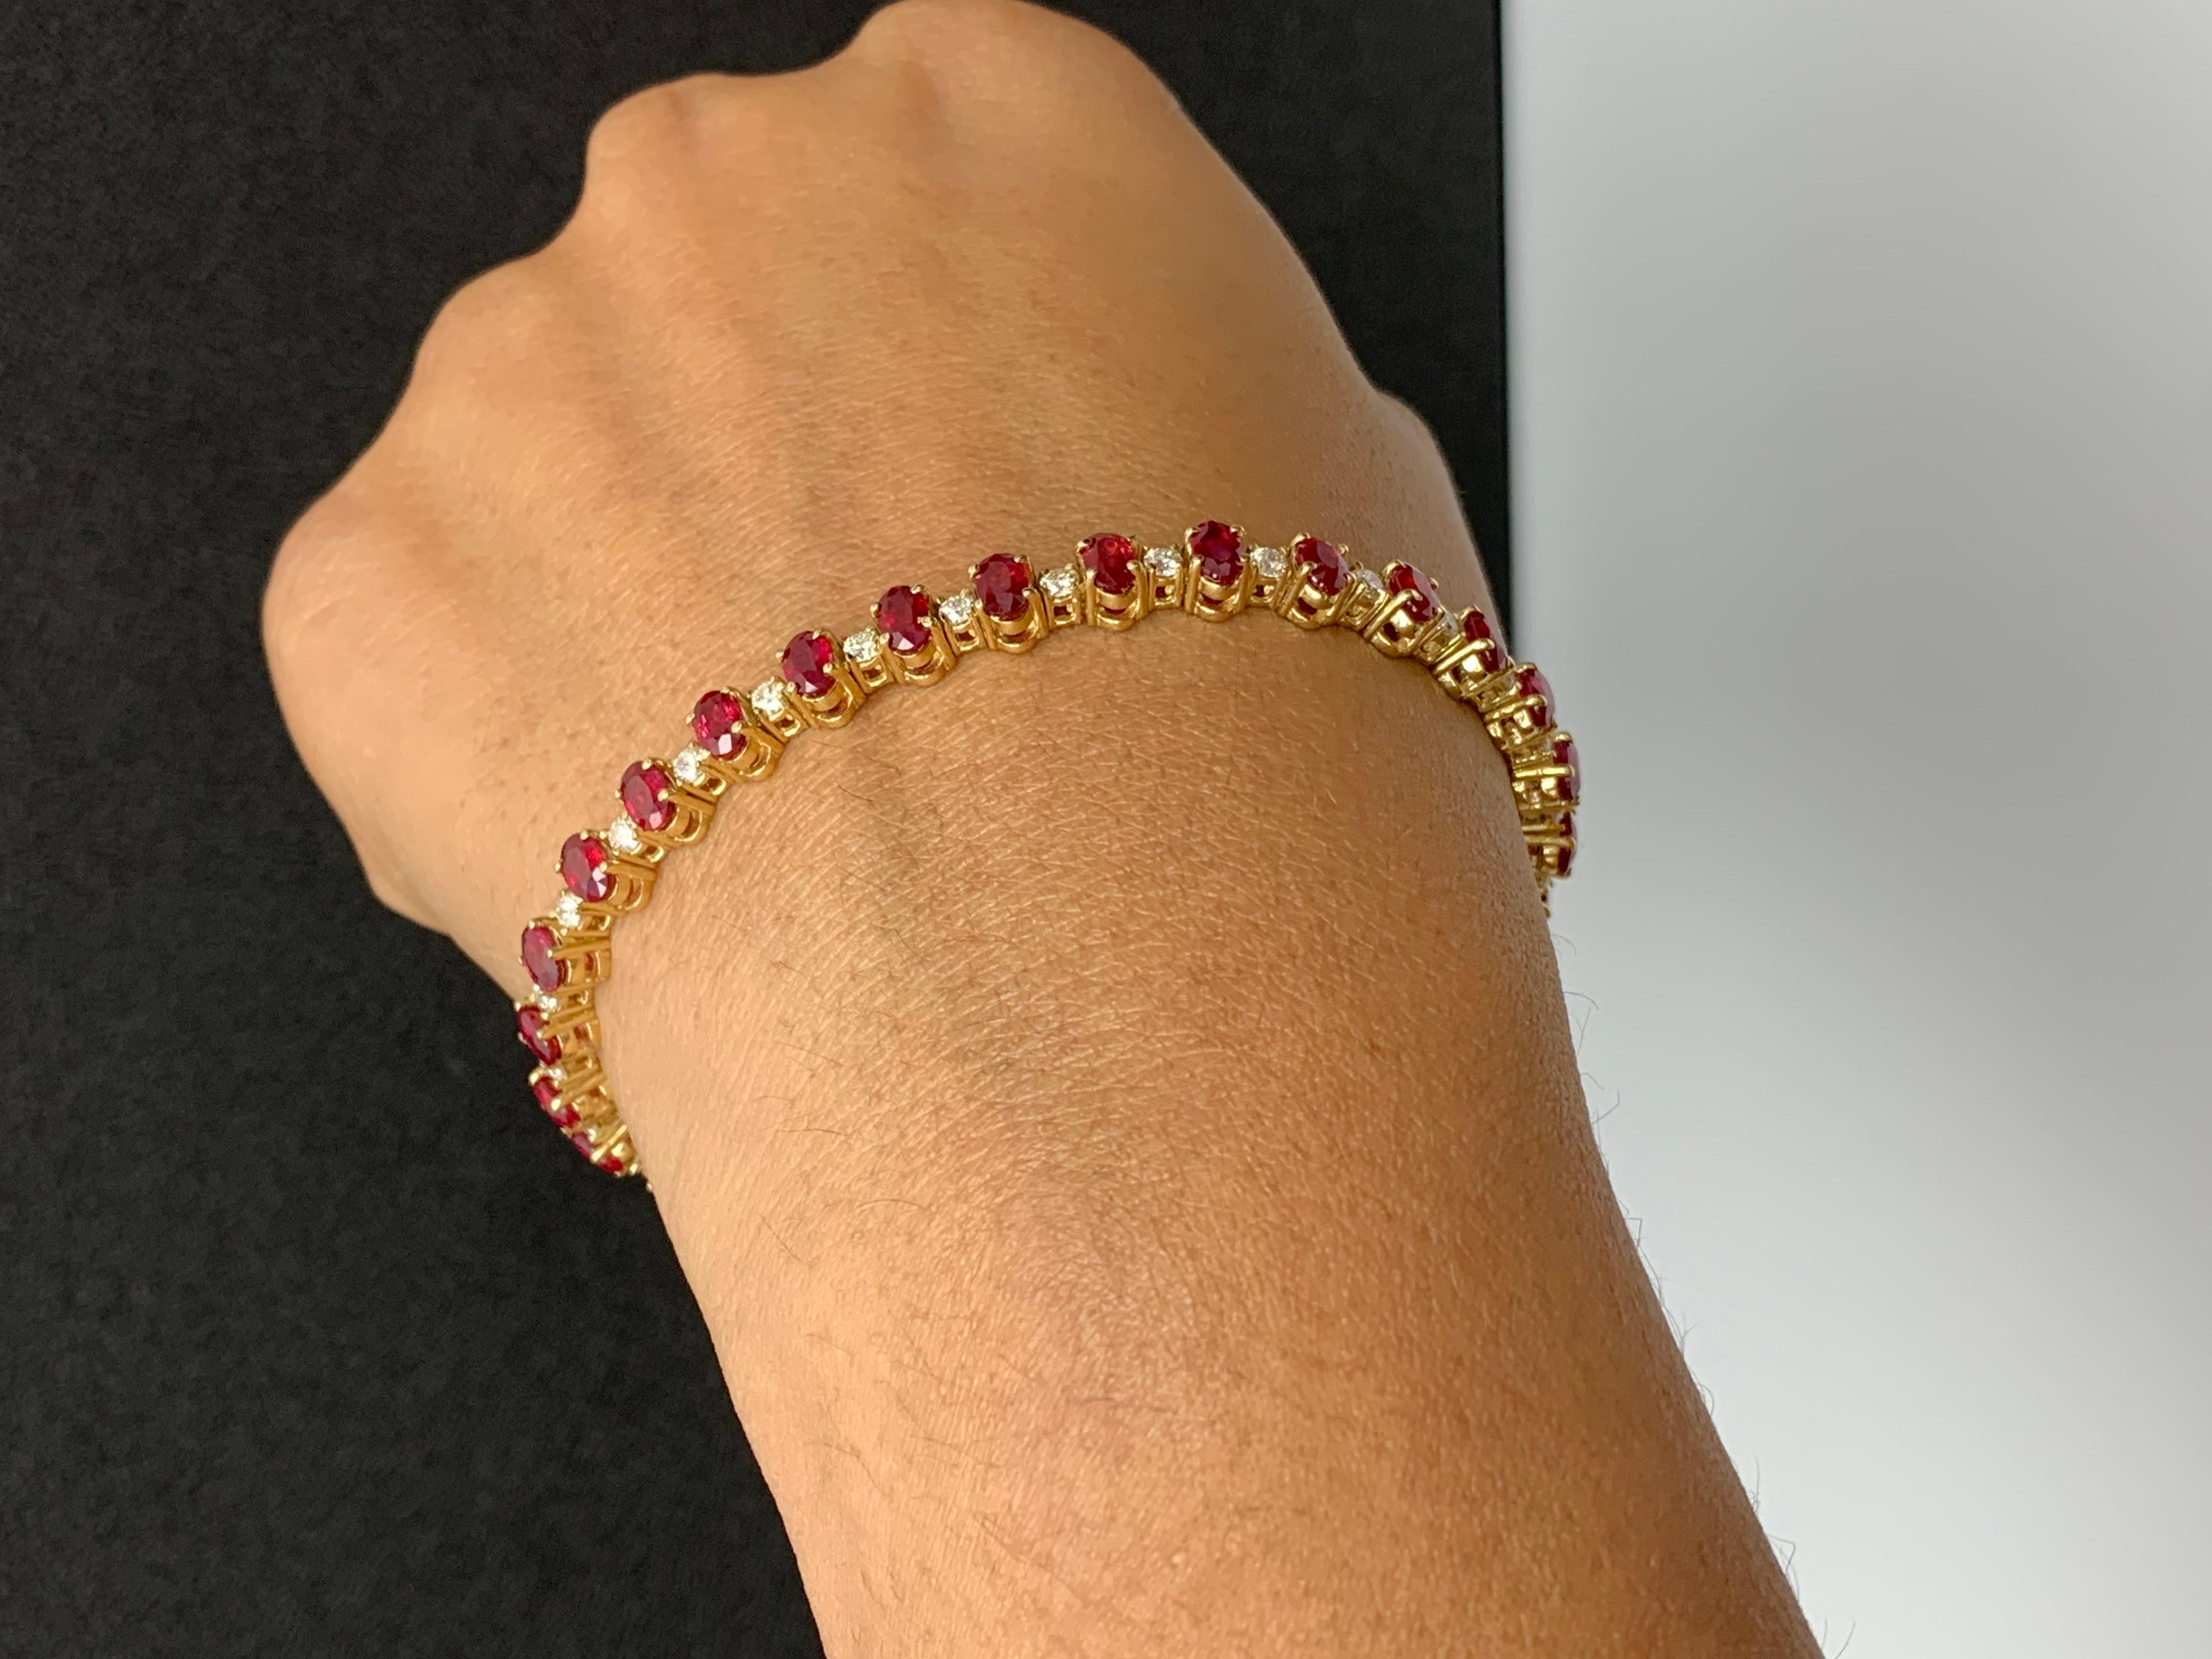 Grandeur 9.27 Carats Oval Cut Ruby and Diamond Bracelet in 14k Yellow Gold For Sale 11